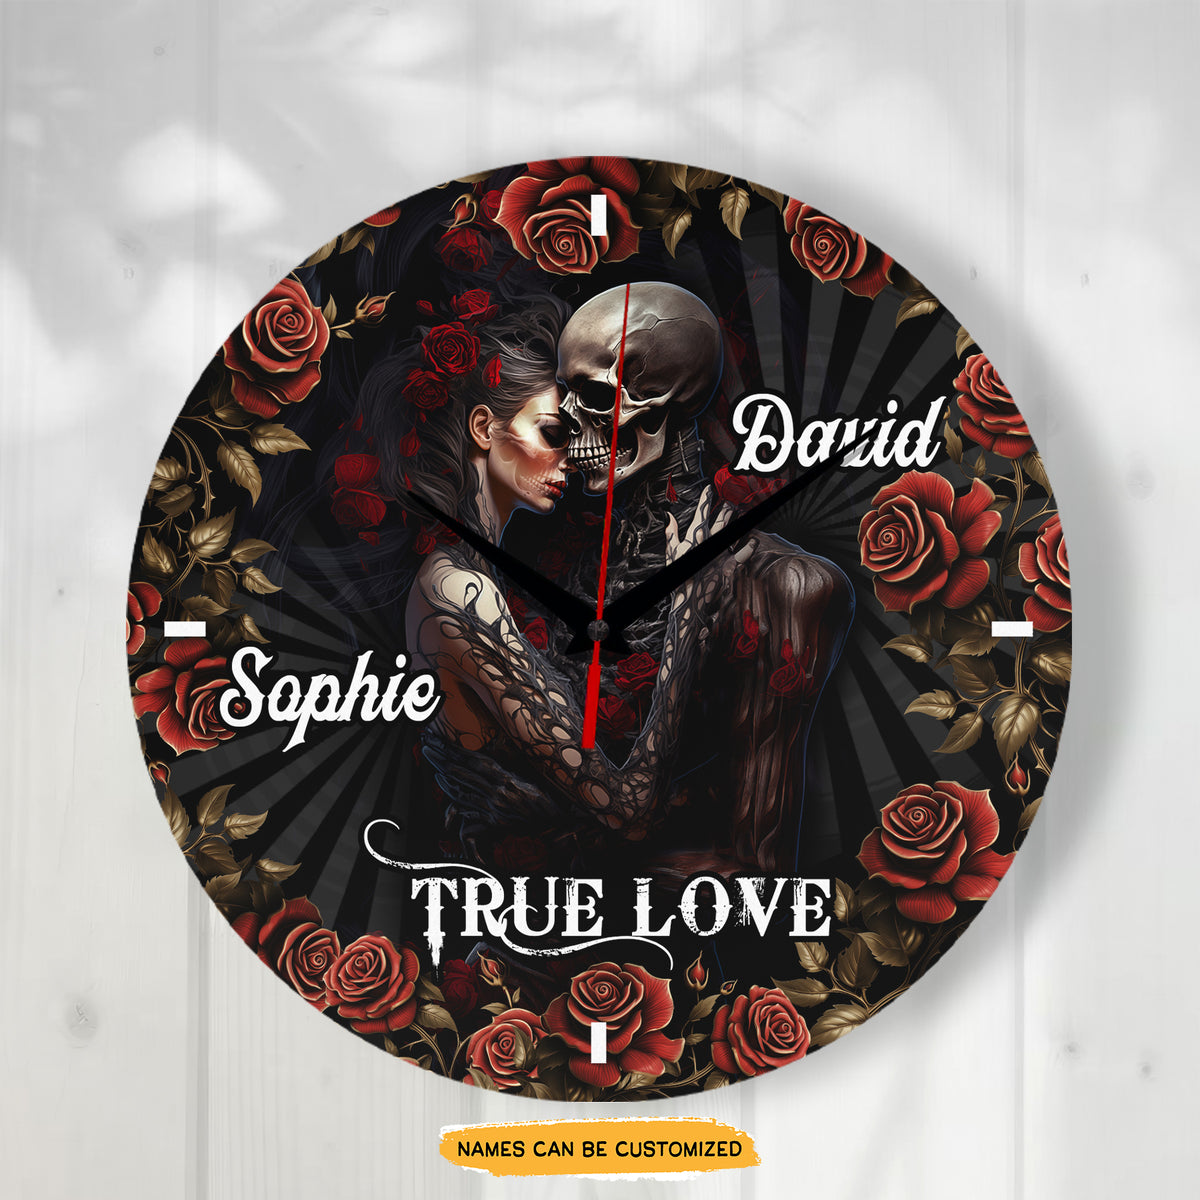 True Love Roses Elegant engraved clock, a sentimental keepsake for your special occasion and enduring love.